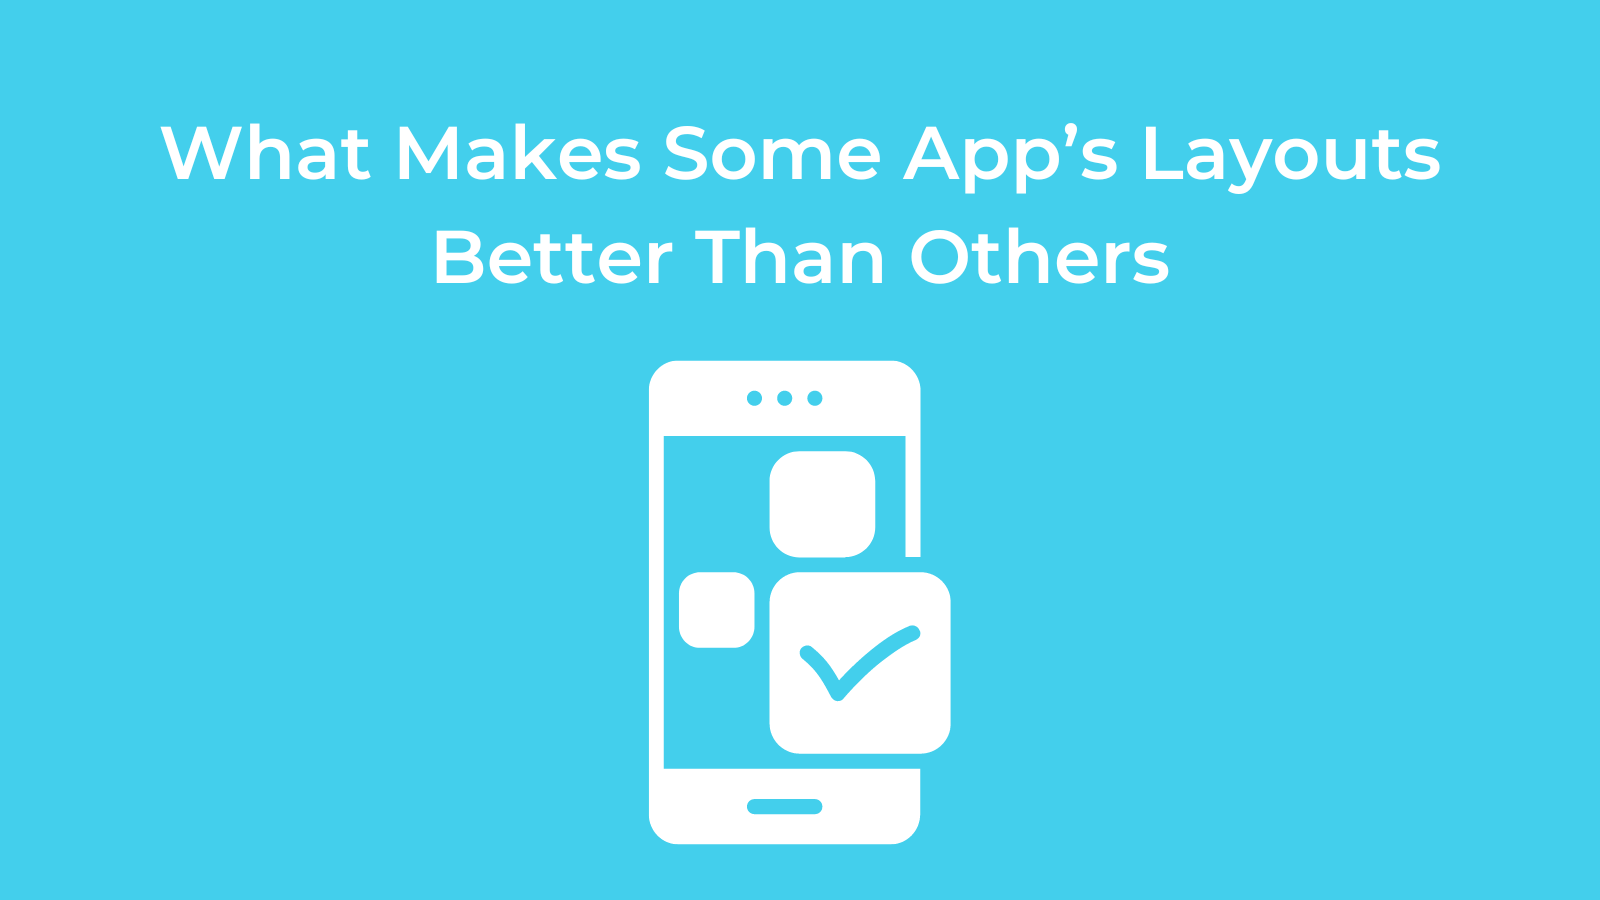 What Makes Some App’s Layouts Better Than Others